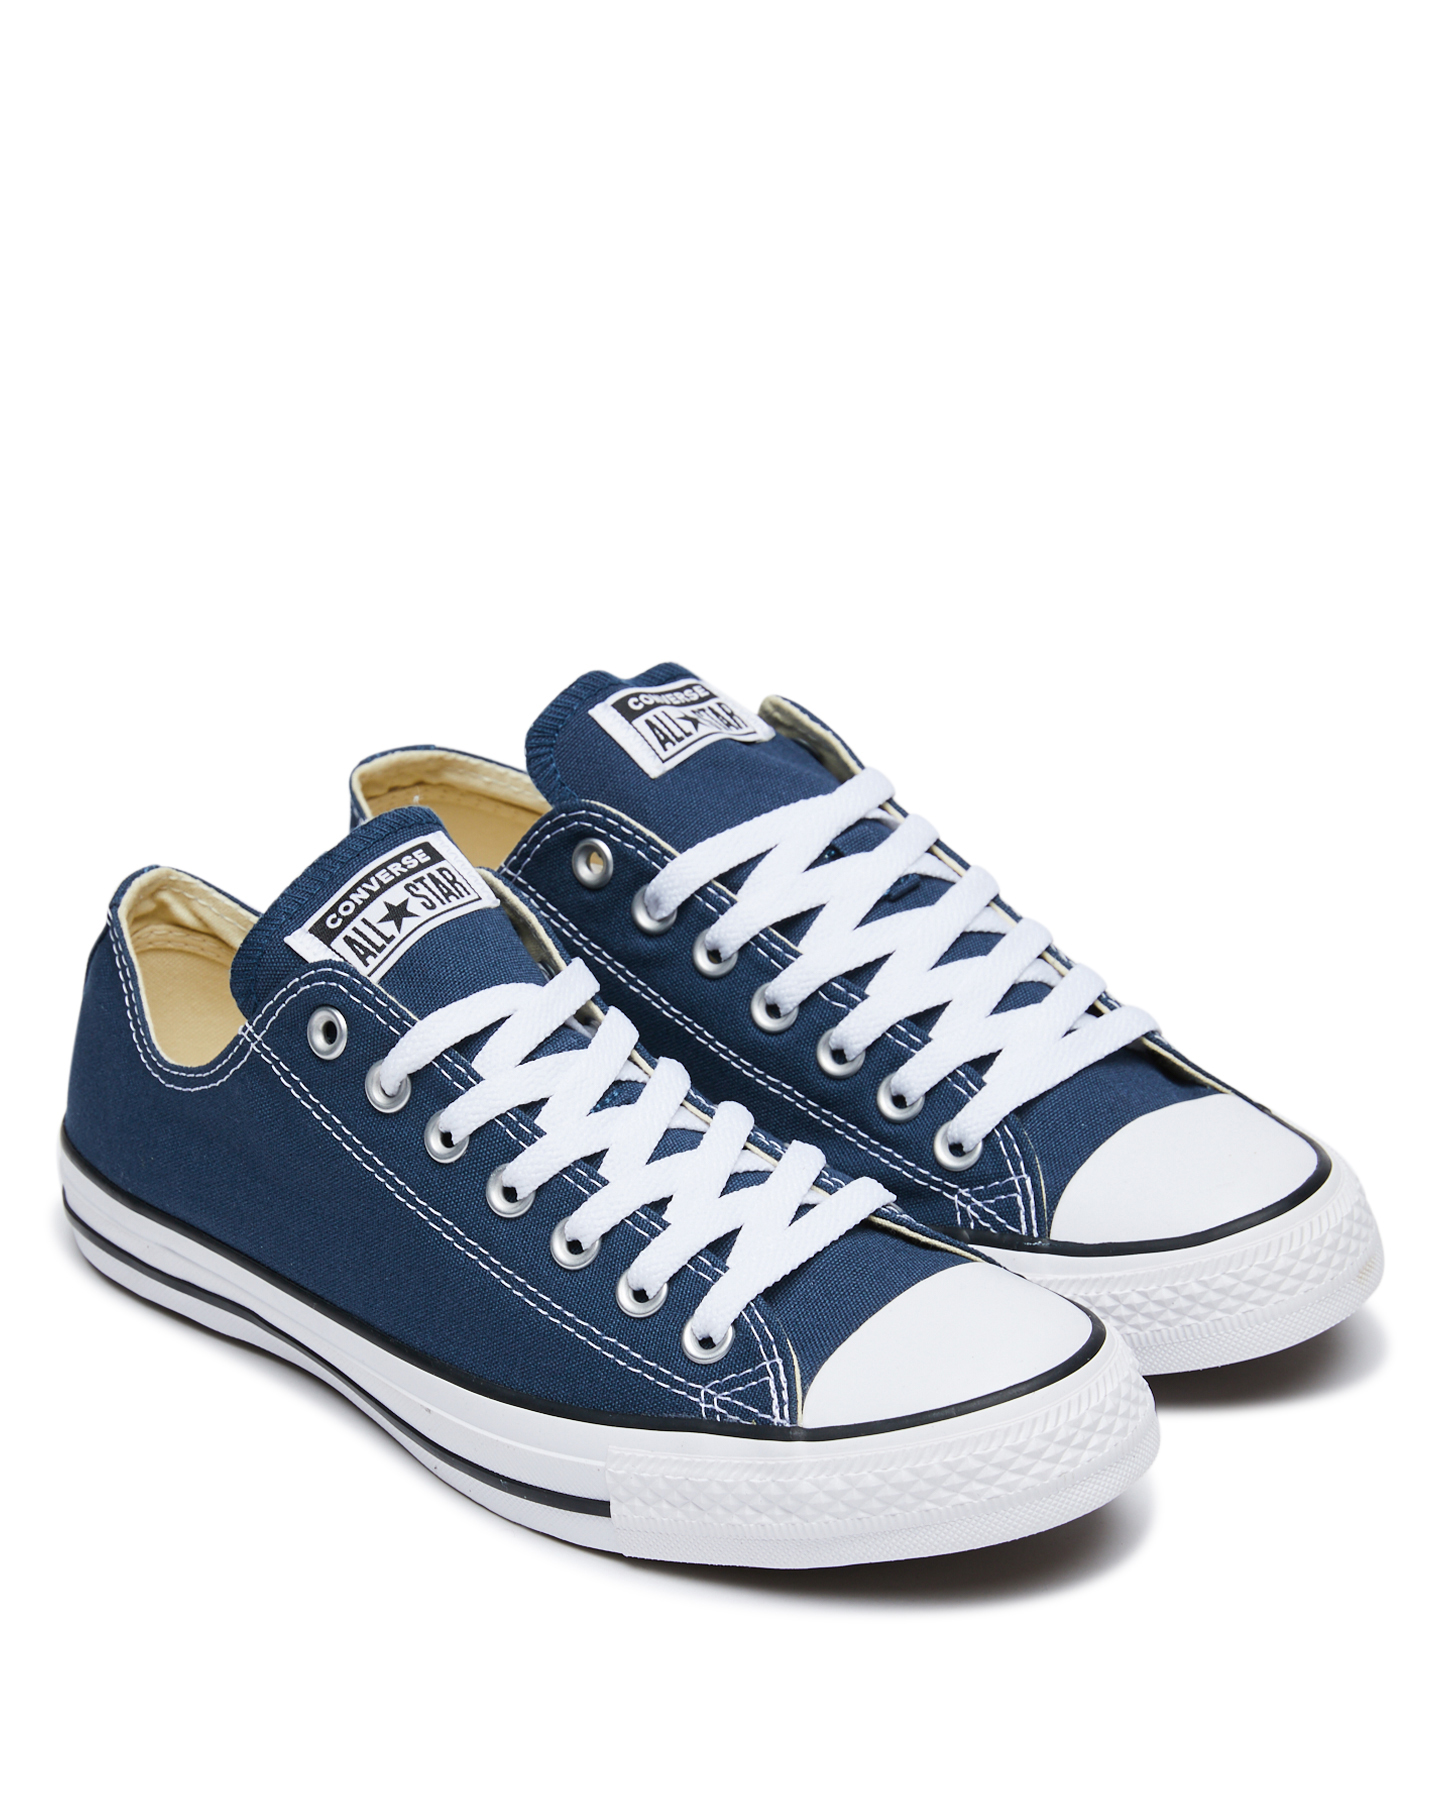 Converse Mens Chuck Taylor All Star Lo Shoe - Navy | SurfStitch